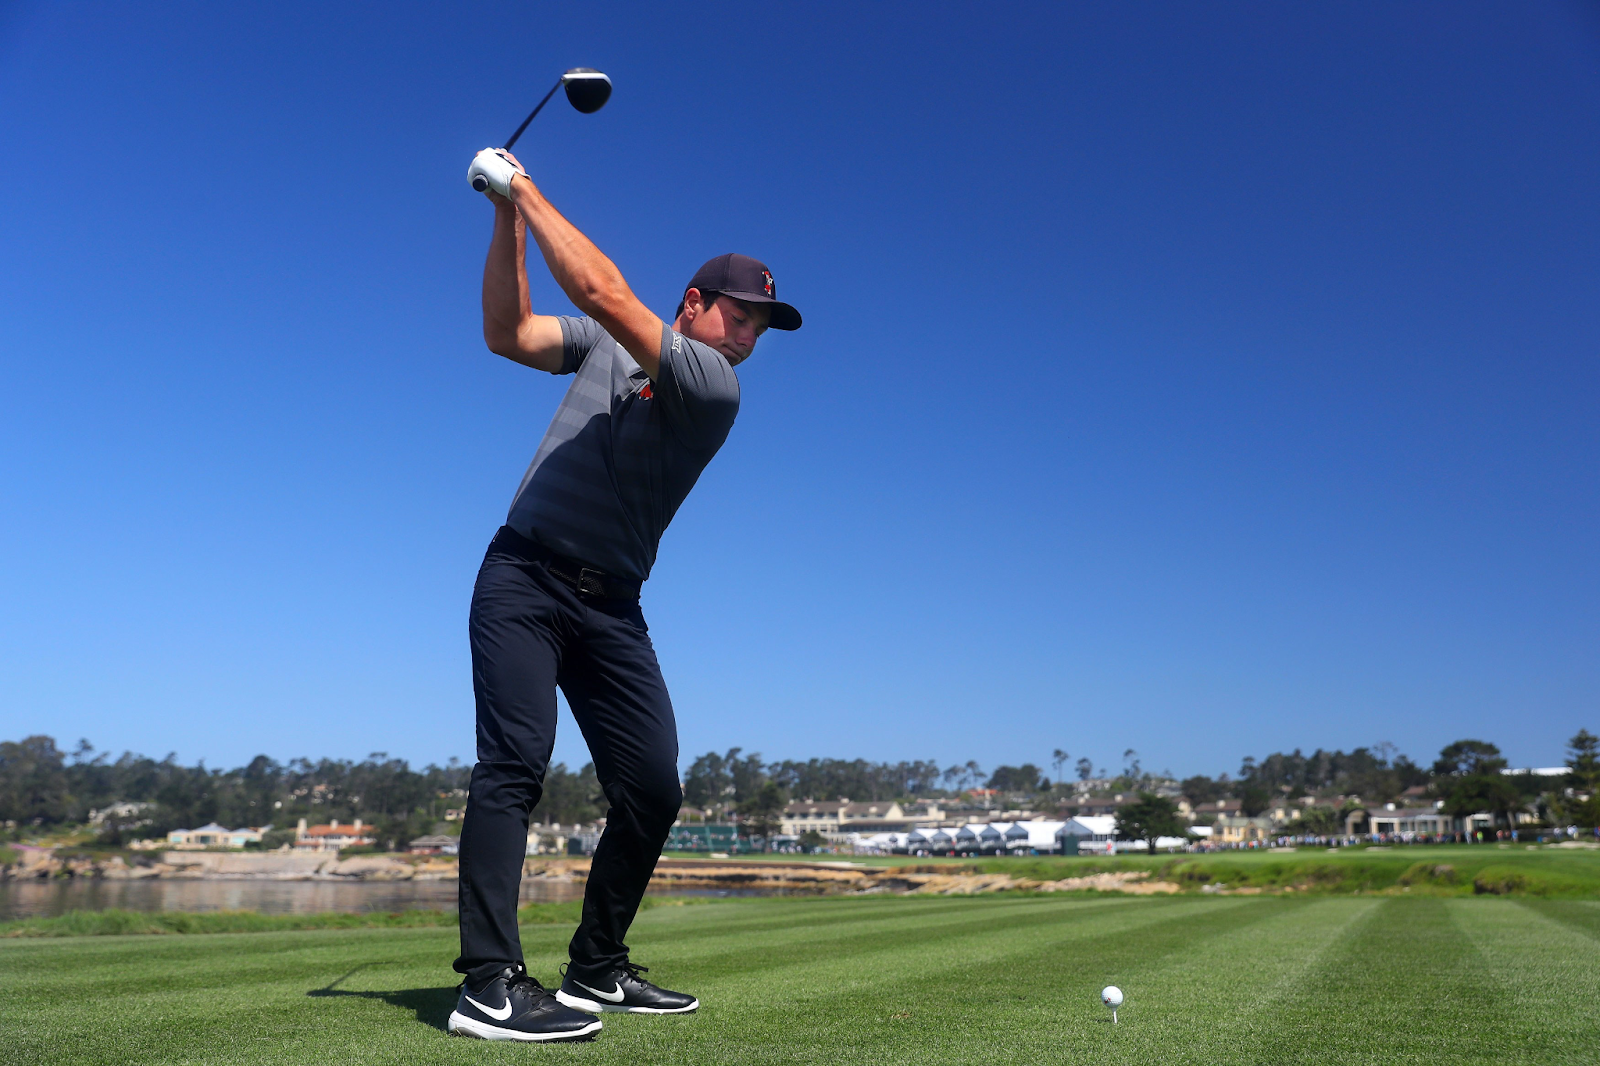 How to Slow Down Your Golf Swing for Better Form and Accuracy